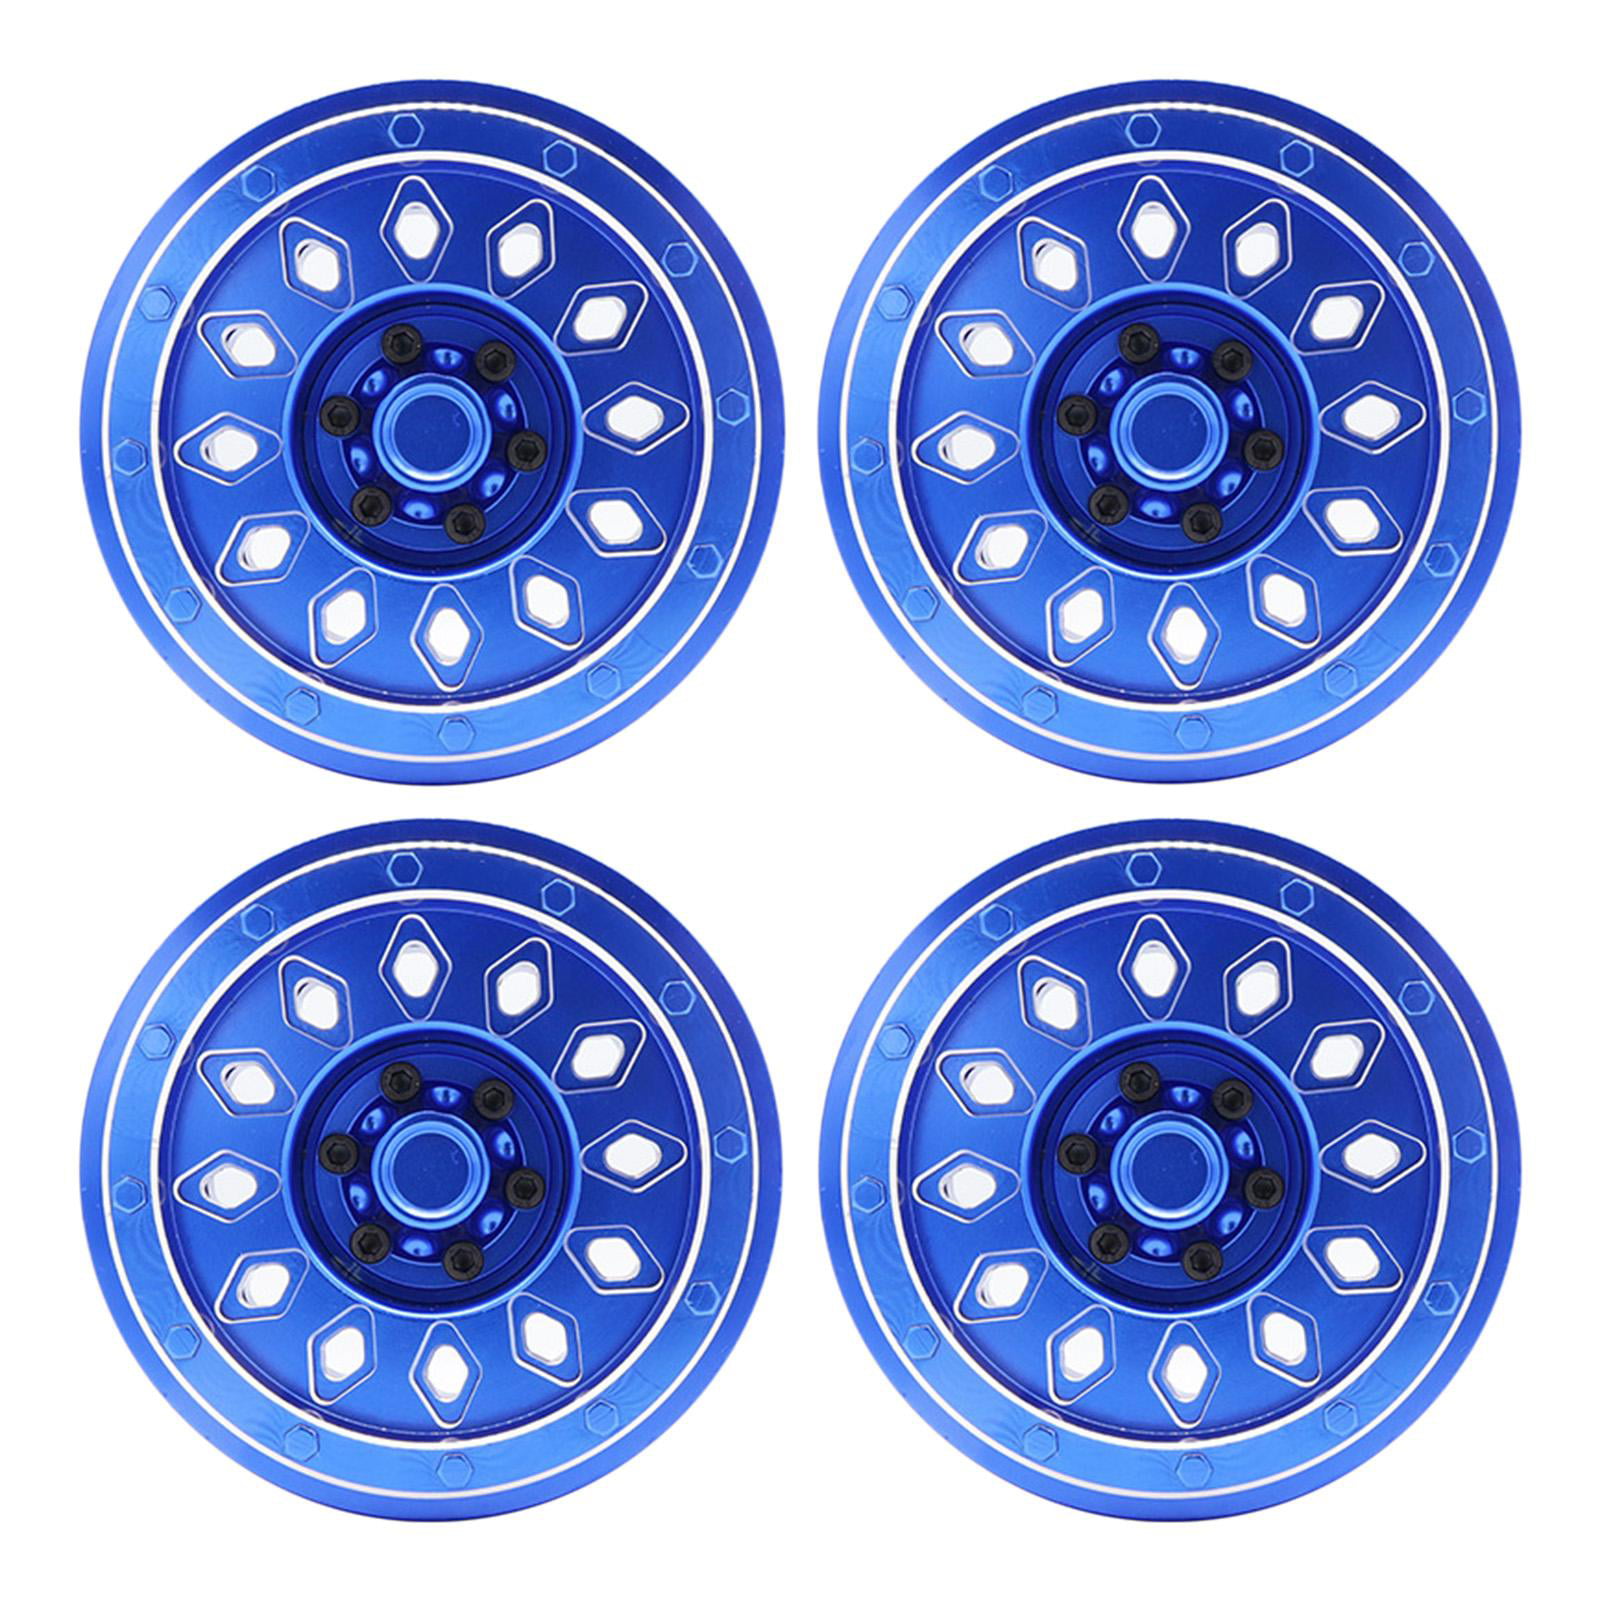 Axial pack of 4 RC Wheel Hub fit for AXIAL SCX6 1:6 Scale RC Crawler Accessories 